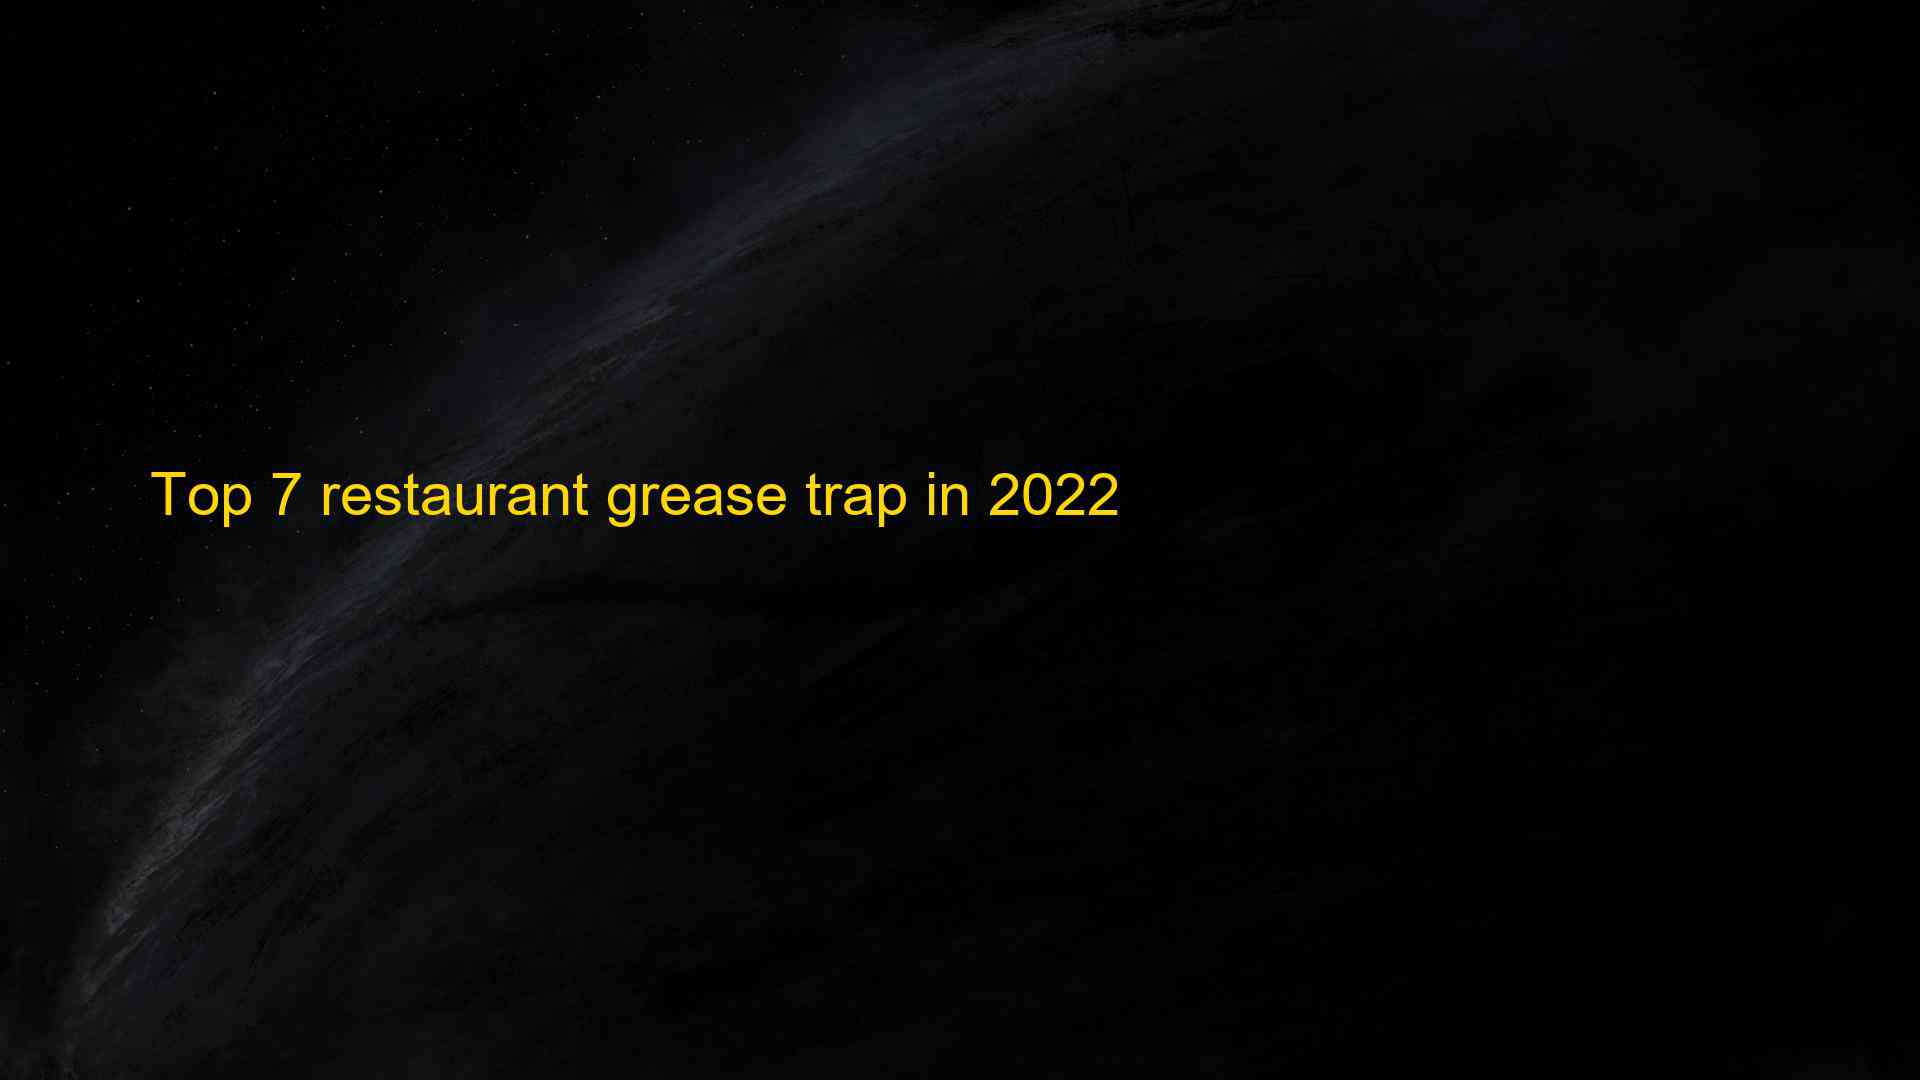 Top 7 restaurant grease trap in 2022 1663393845